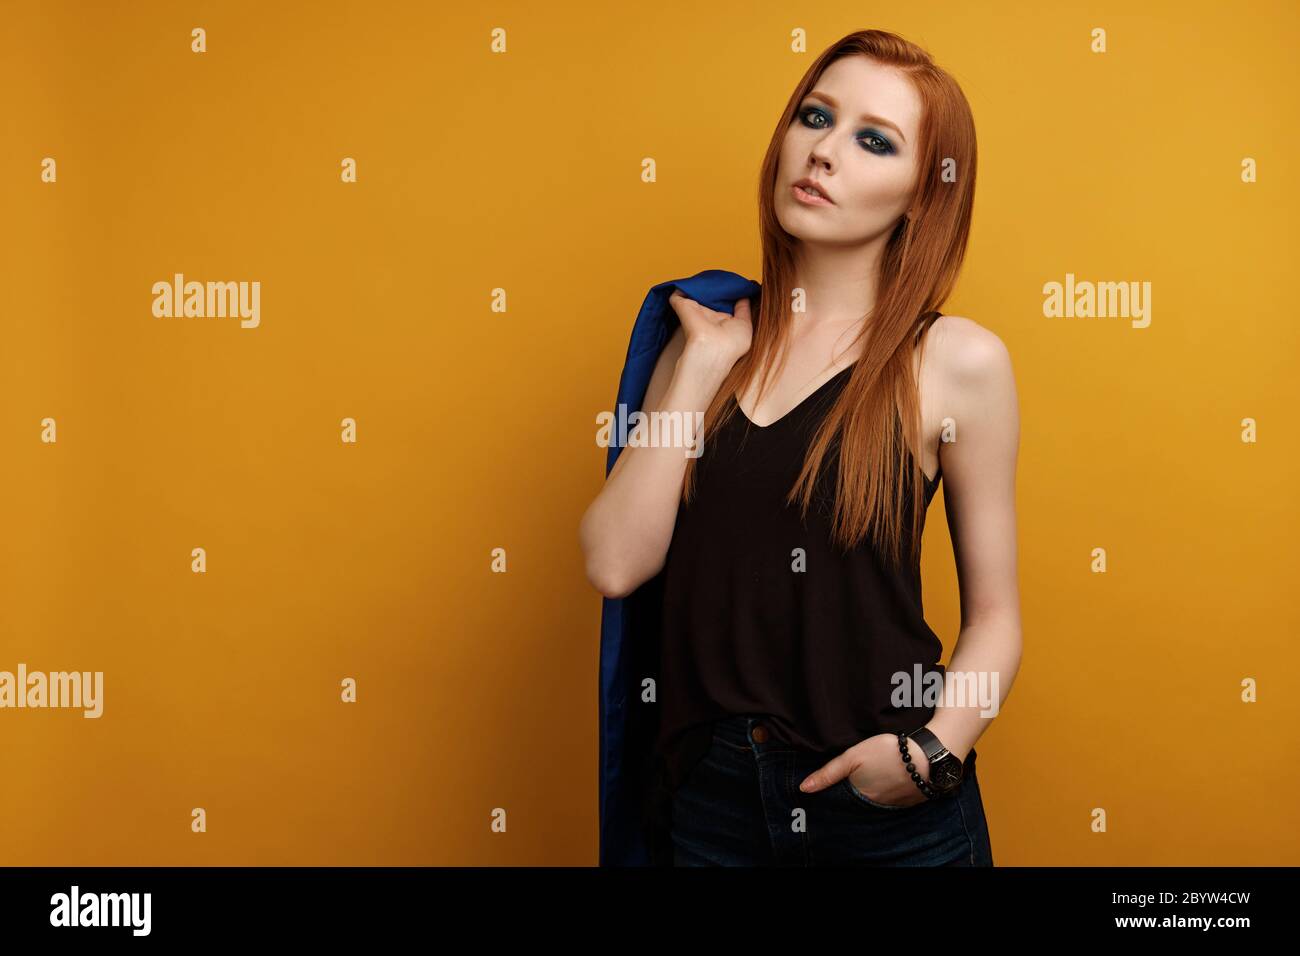 girl in a black top and blue smokey stands on a yellow background, throwing a jacket over shoulder and putting hand in pocket Stock Photo